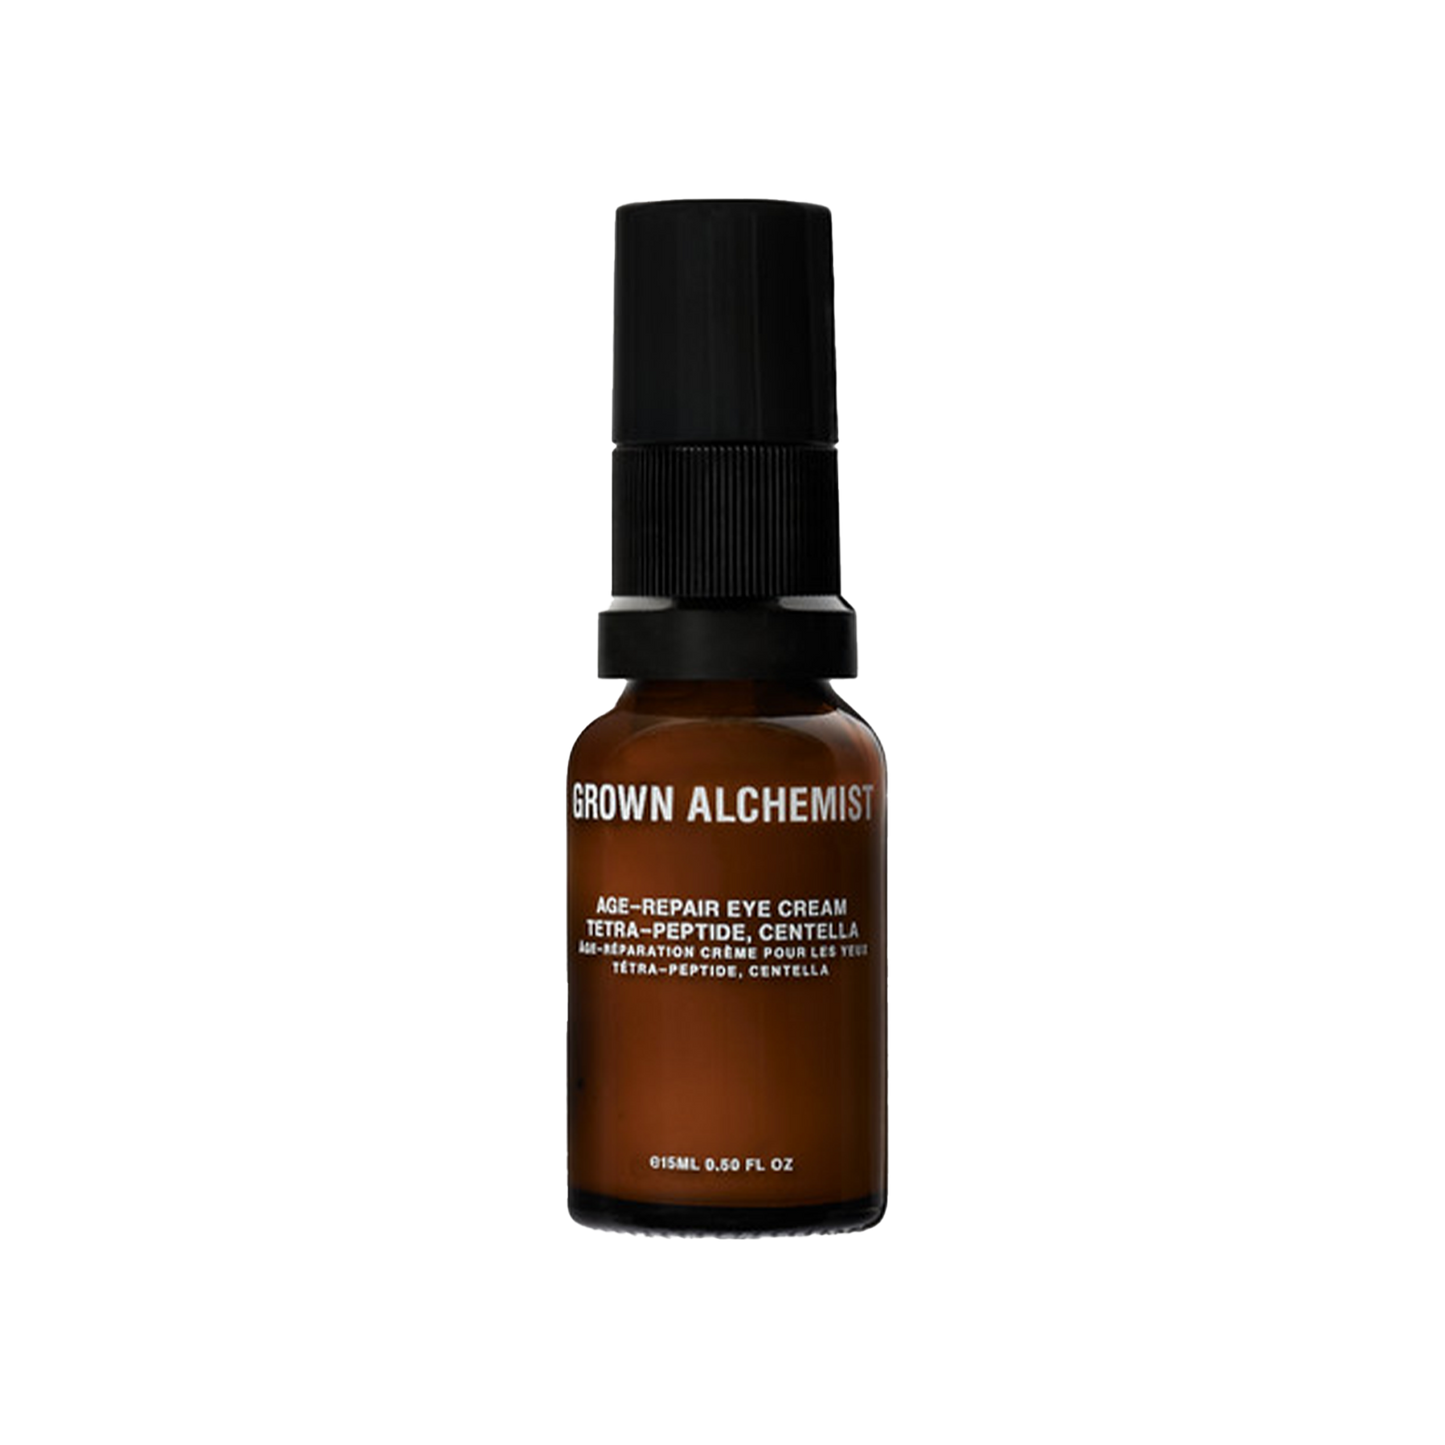 Grown Alchemist Age-Repair Eye Cream: This advanced eye cream formulated to improve the appearance of skin firmness and elasticity around the eye. Noticeably reducing dark circles and puffiness under the eye while reducing the appearance of expression lines and wrinkles around the eyes.